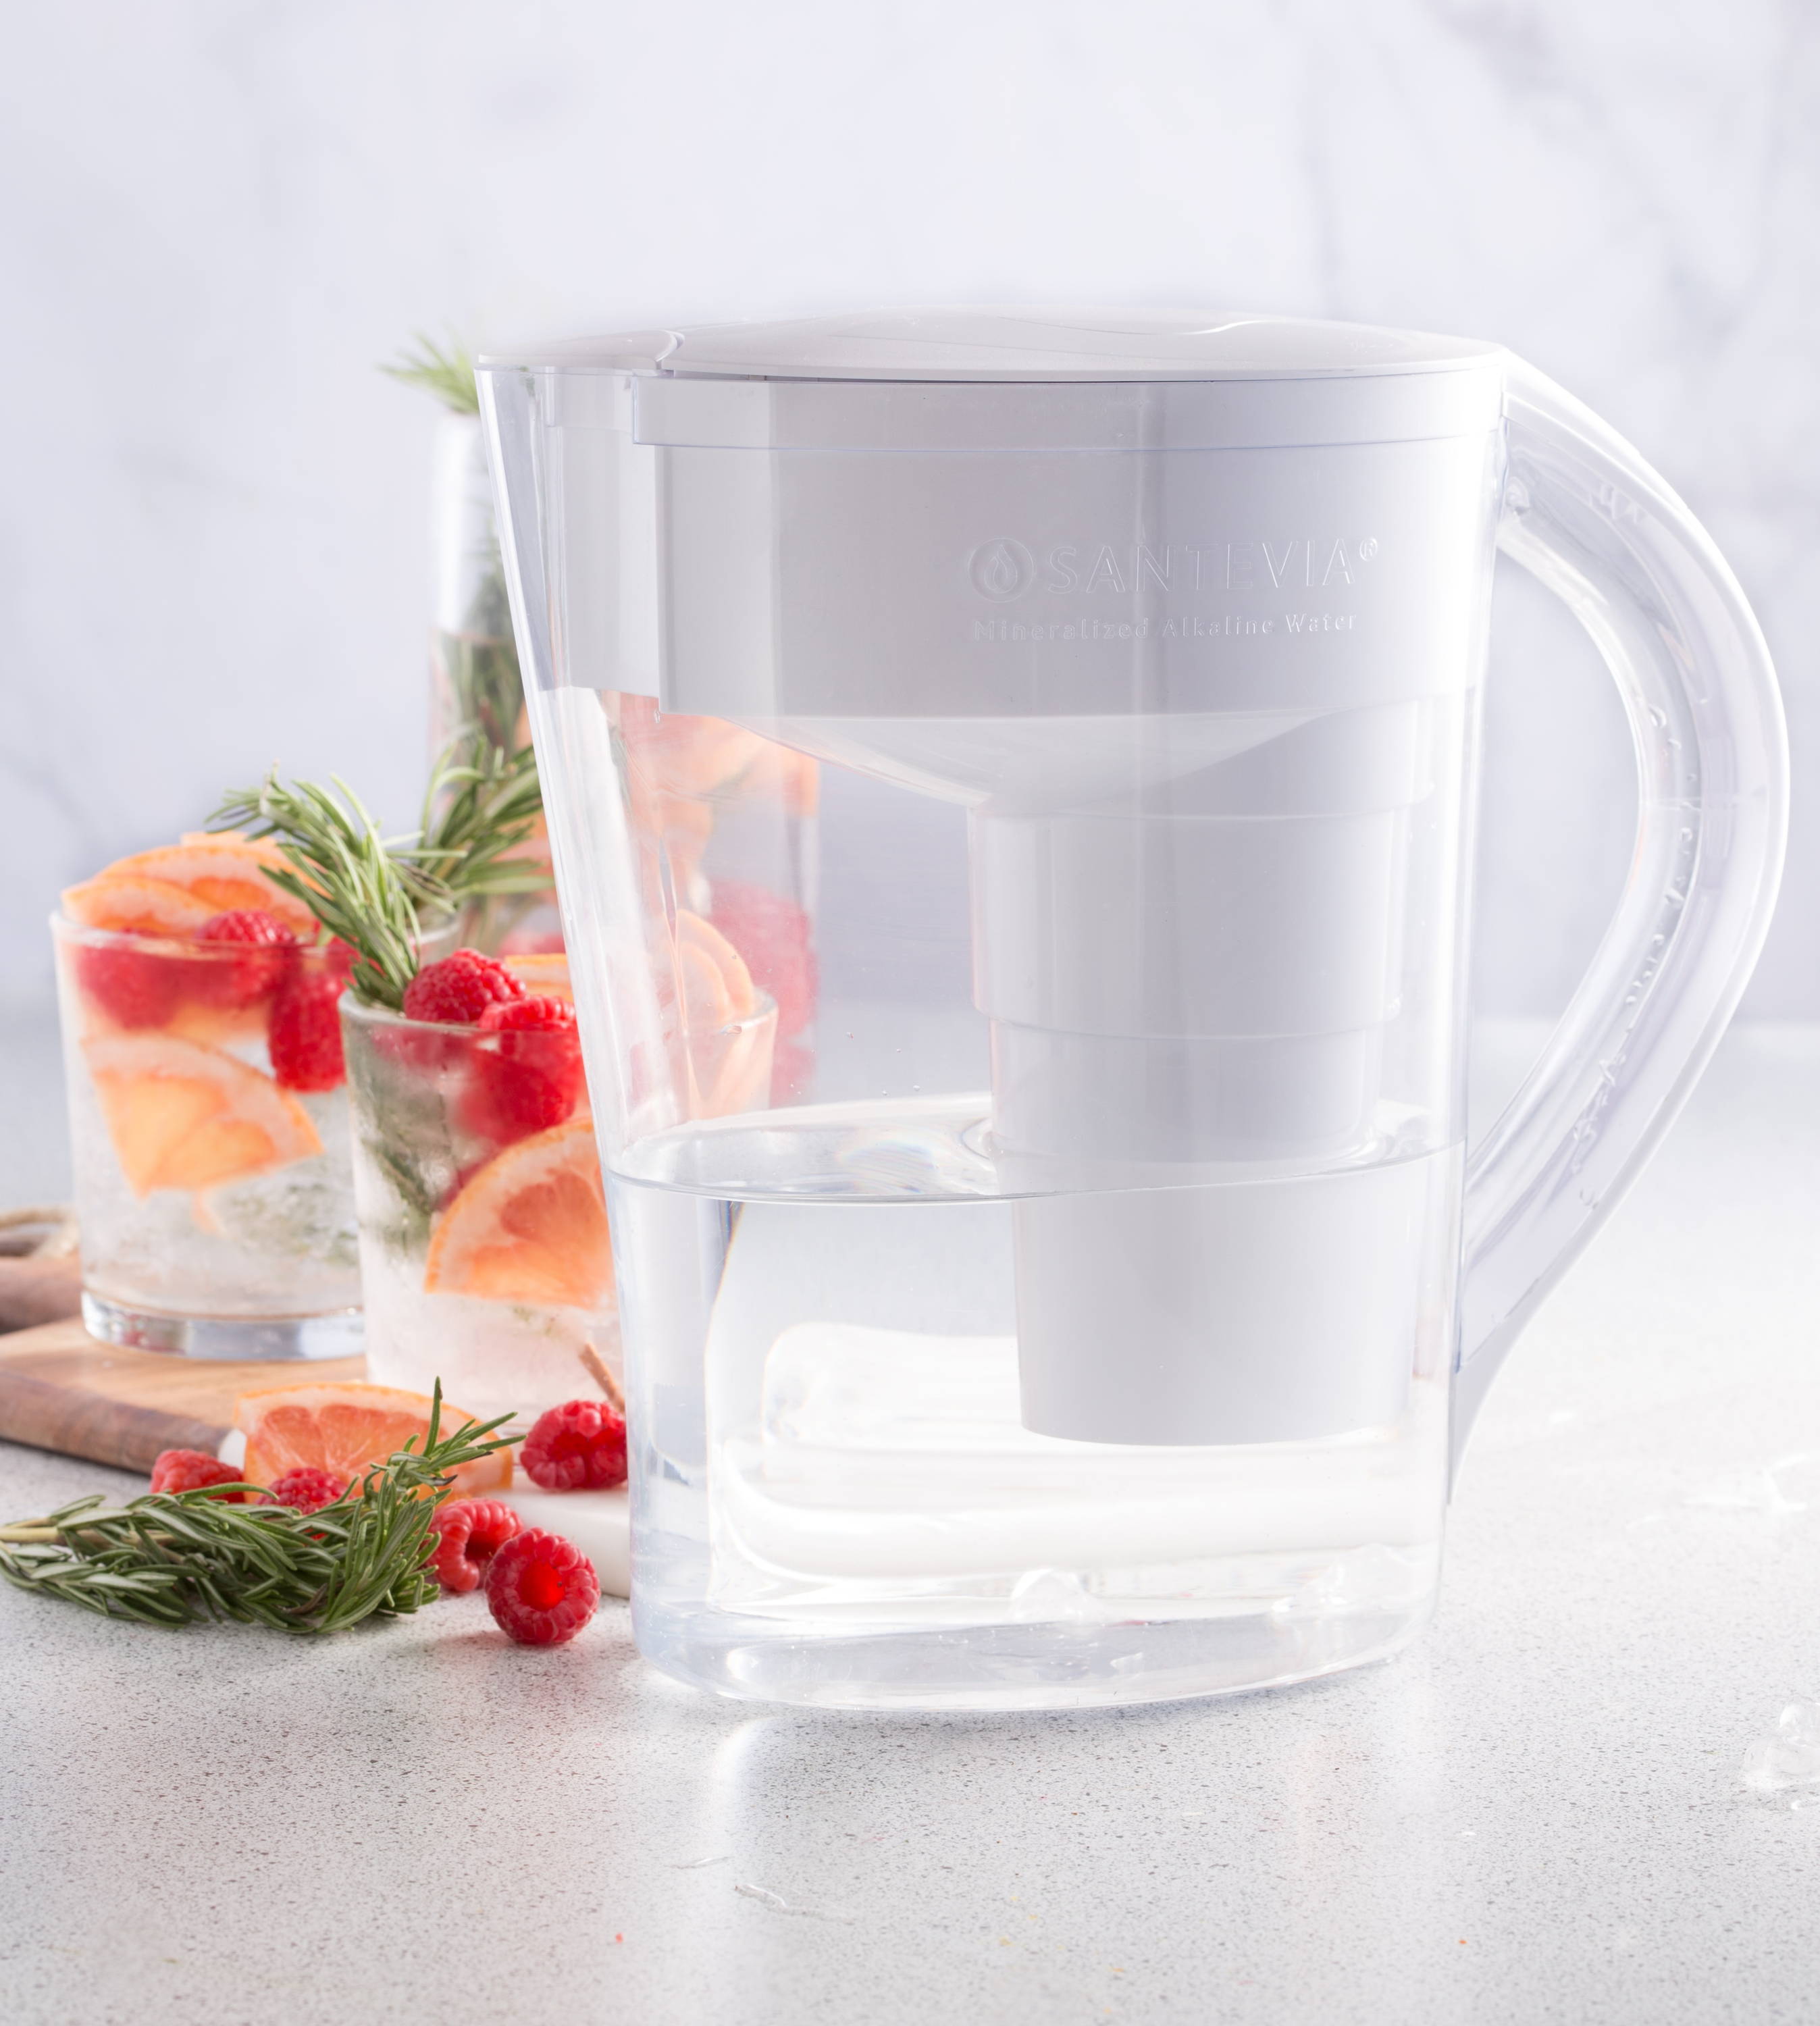 A Santevia MINA Pitcher with rosemary, raspberry, and grapefruit infused alkaline water